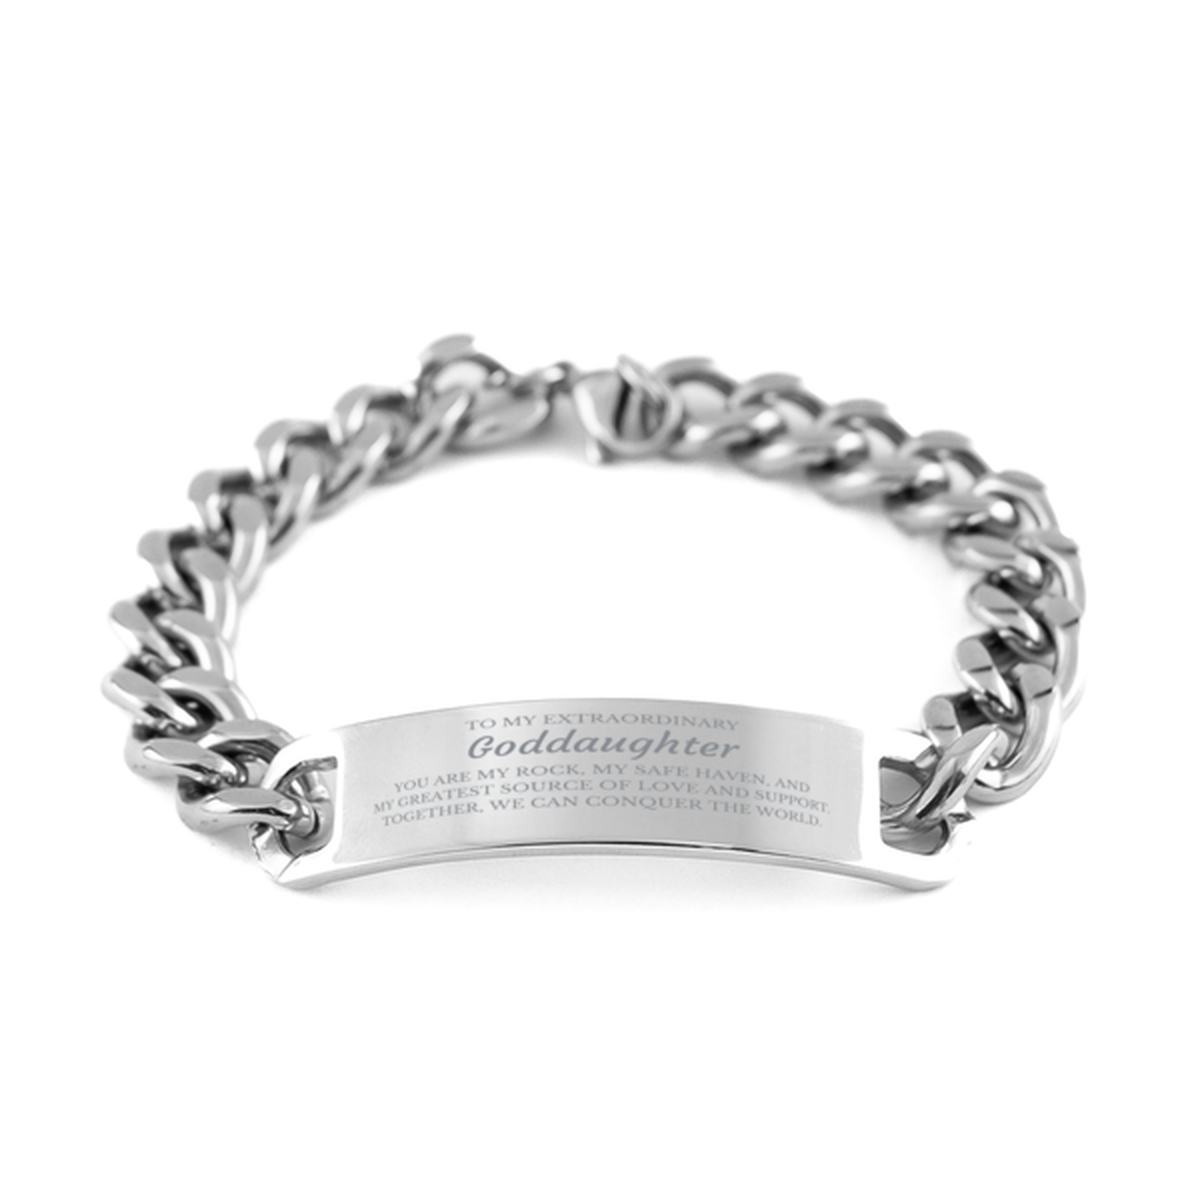 To My Extraordinary Goddaughter Gifts, Together, we can conquer the world, Birthday Cuban Chain Stainless Steel Bracelet For Goddaughter, Christmas Gifts For Goddaughter